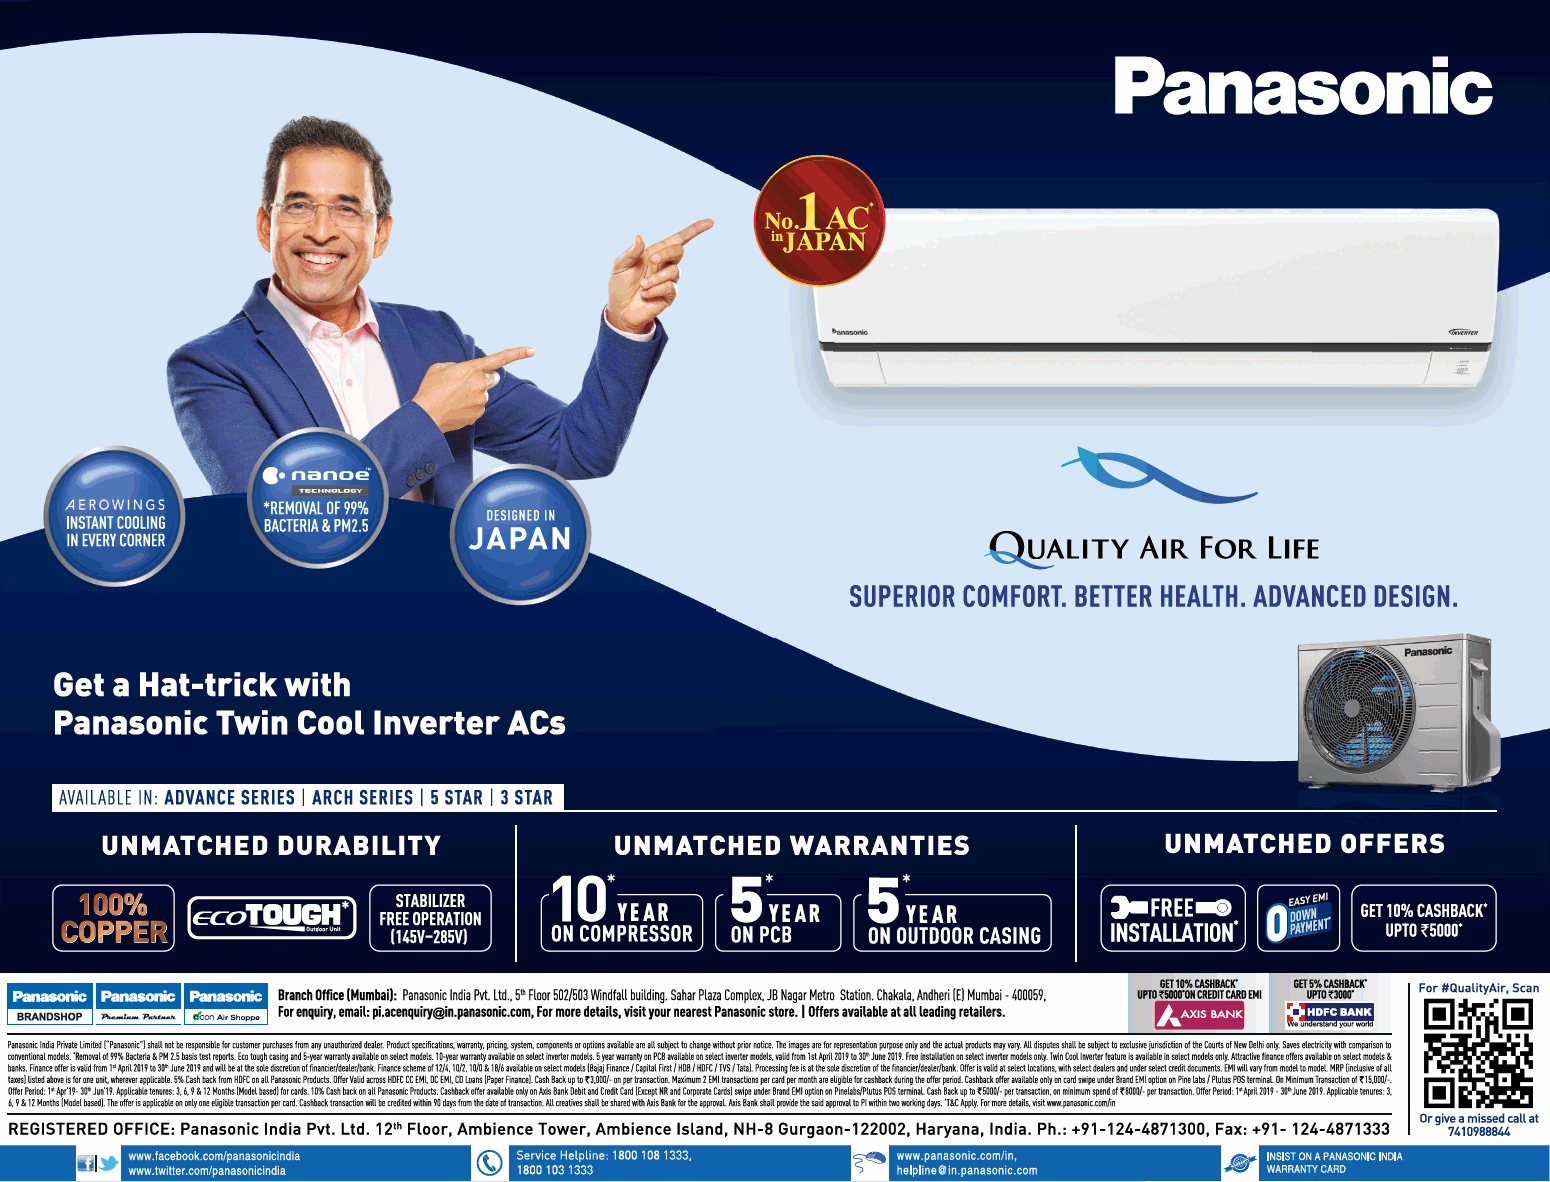 panasonic-air-conditioners-quality-air-for-life-ad-bombay-times-13-04-2019.png